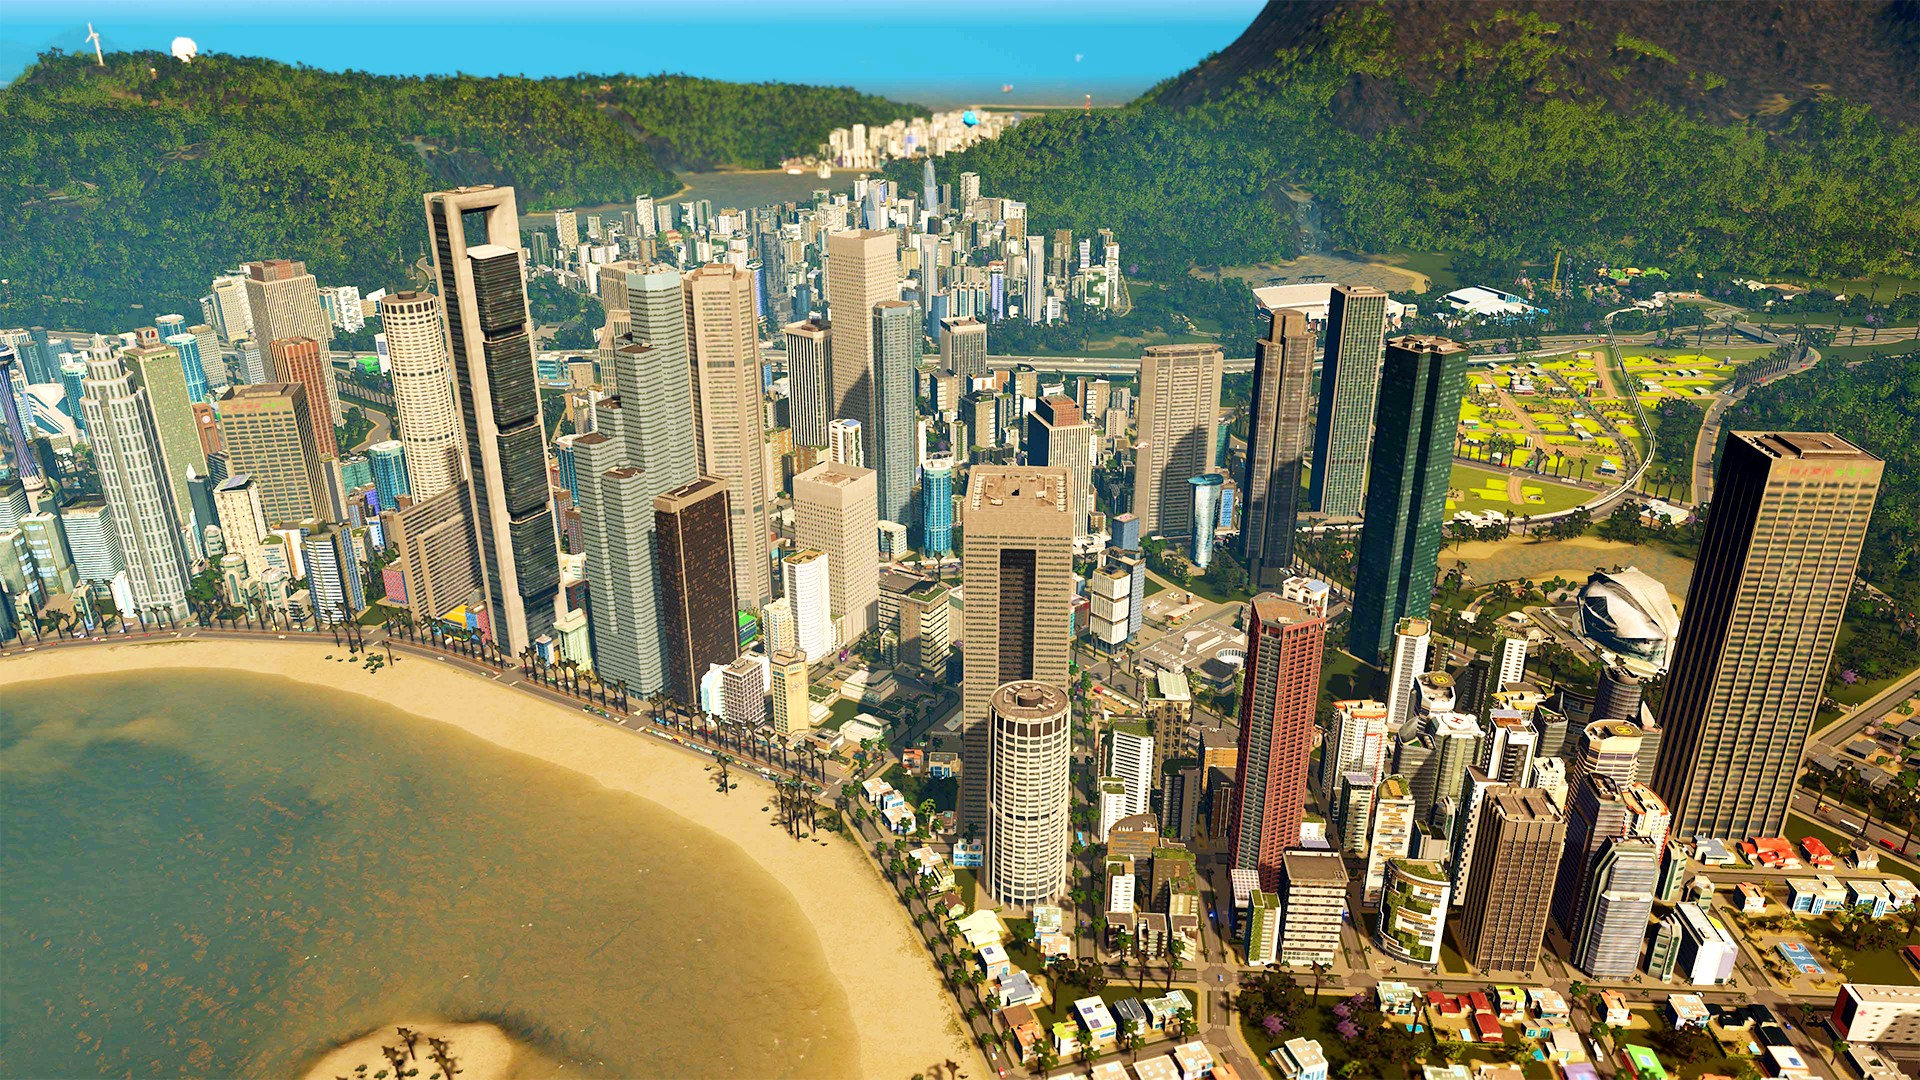 Cities: Skylines expansion series will add 10 DLCs of local colour